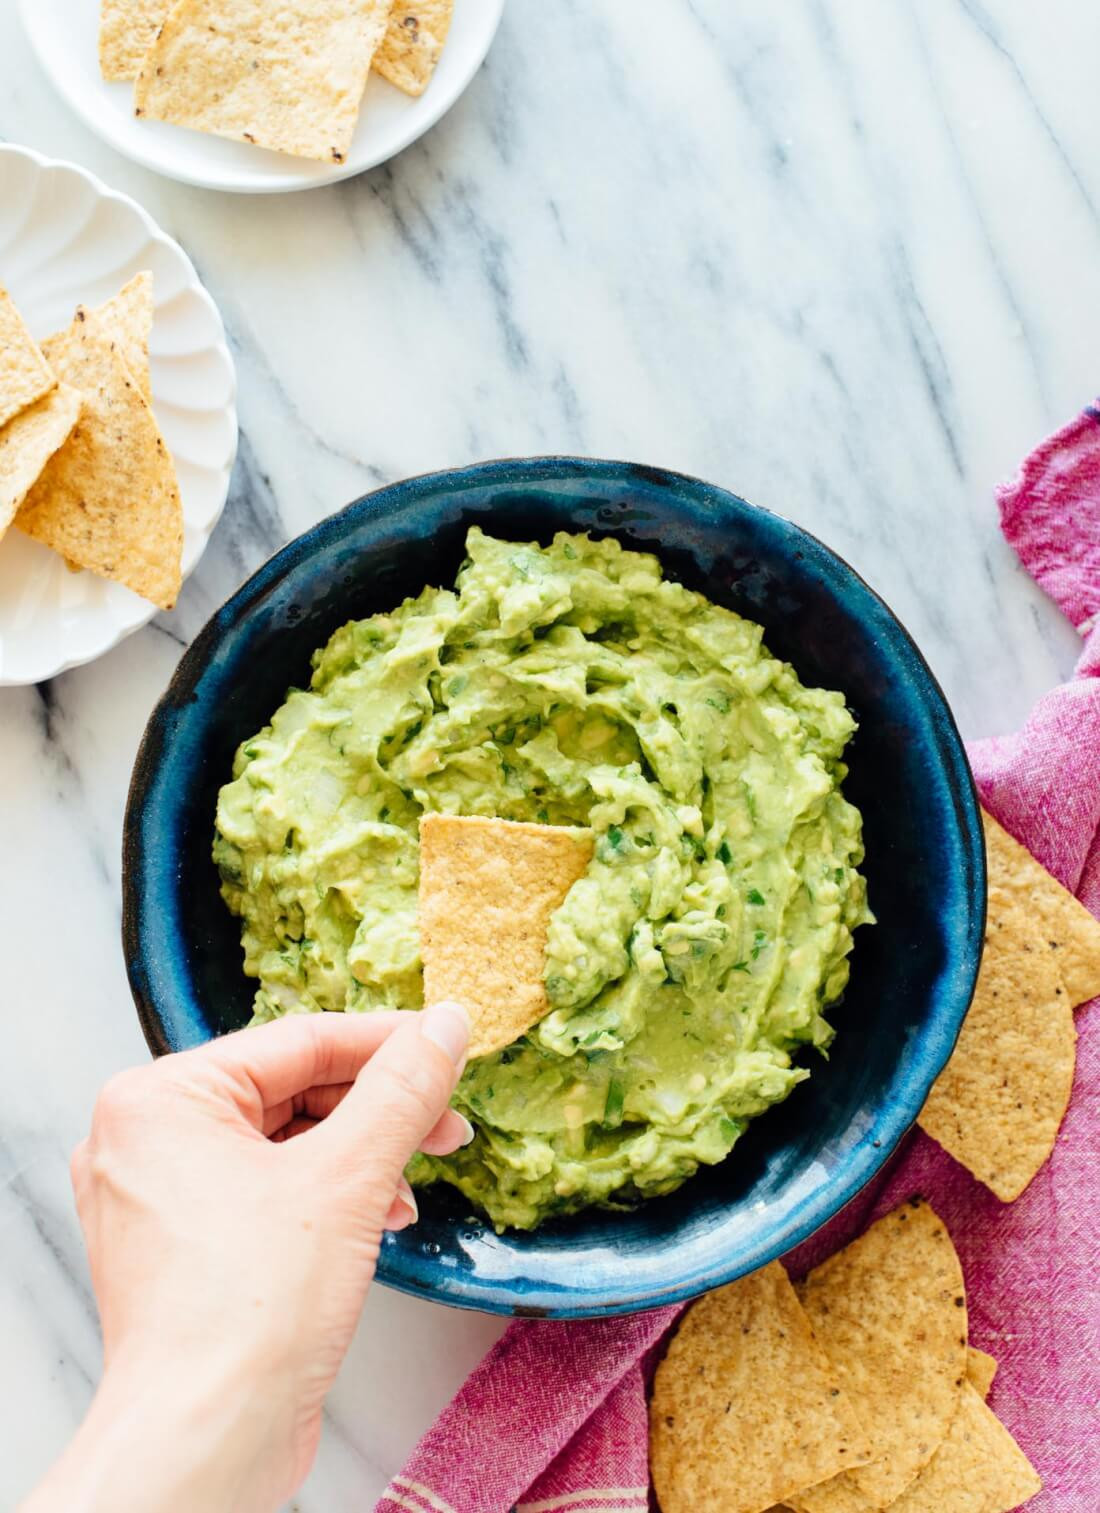 Best Guacamole Dip Recipe
 The Best Guacamole Cookie and Kate